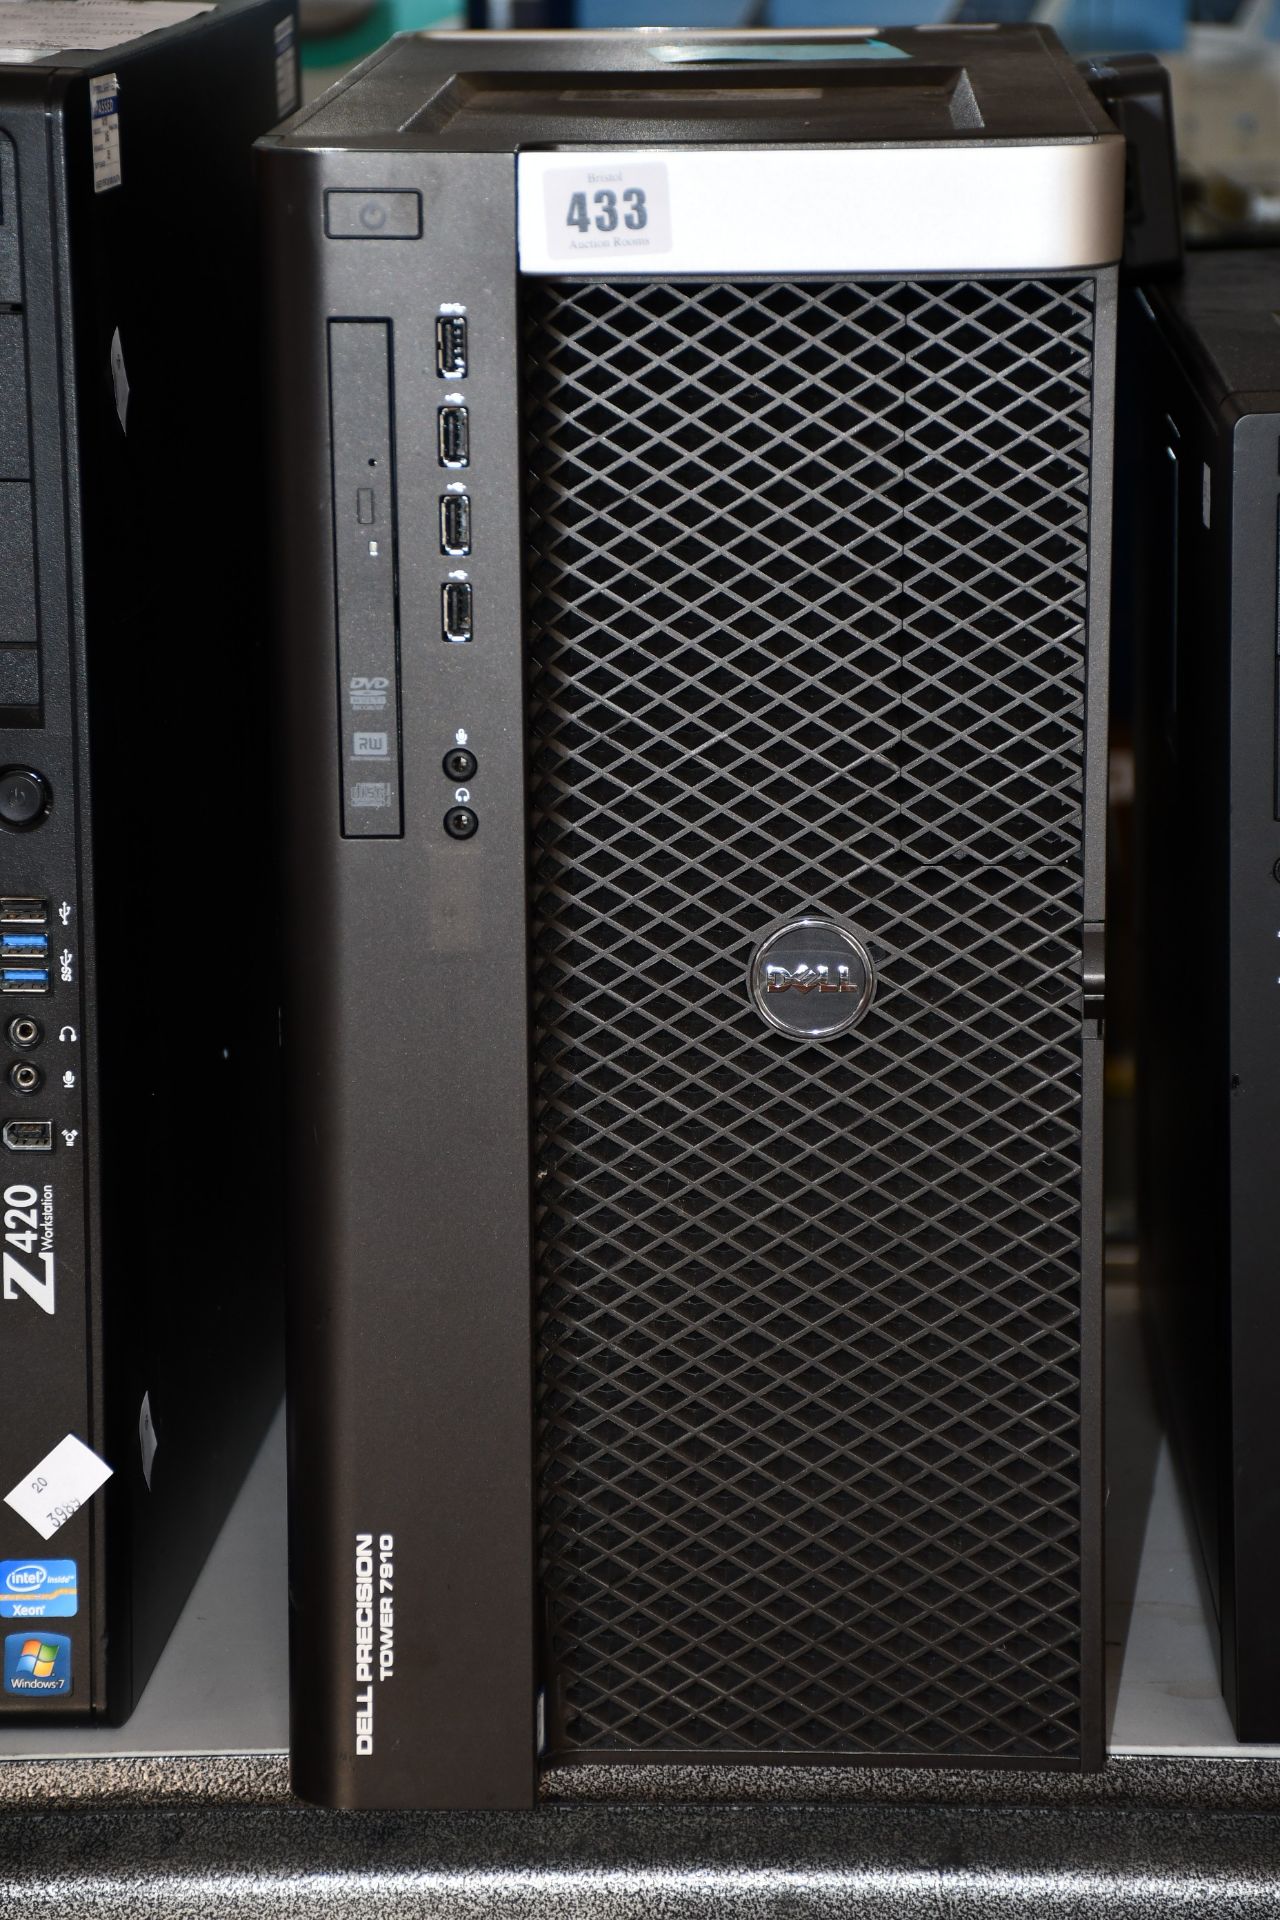 A pre-owned Dell Precision Tower 7910 with Intel Xeon E5-2620 v4 2.10GHz processors and 64GB RAM (